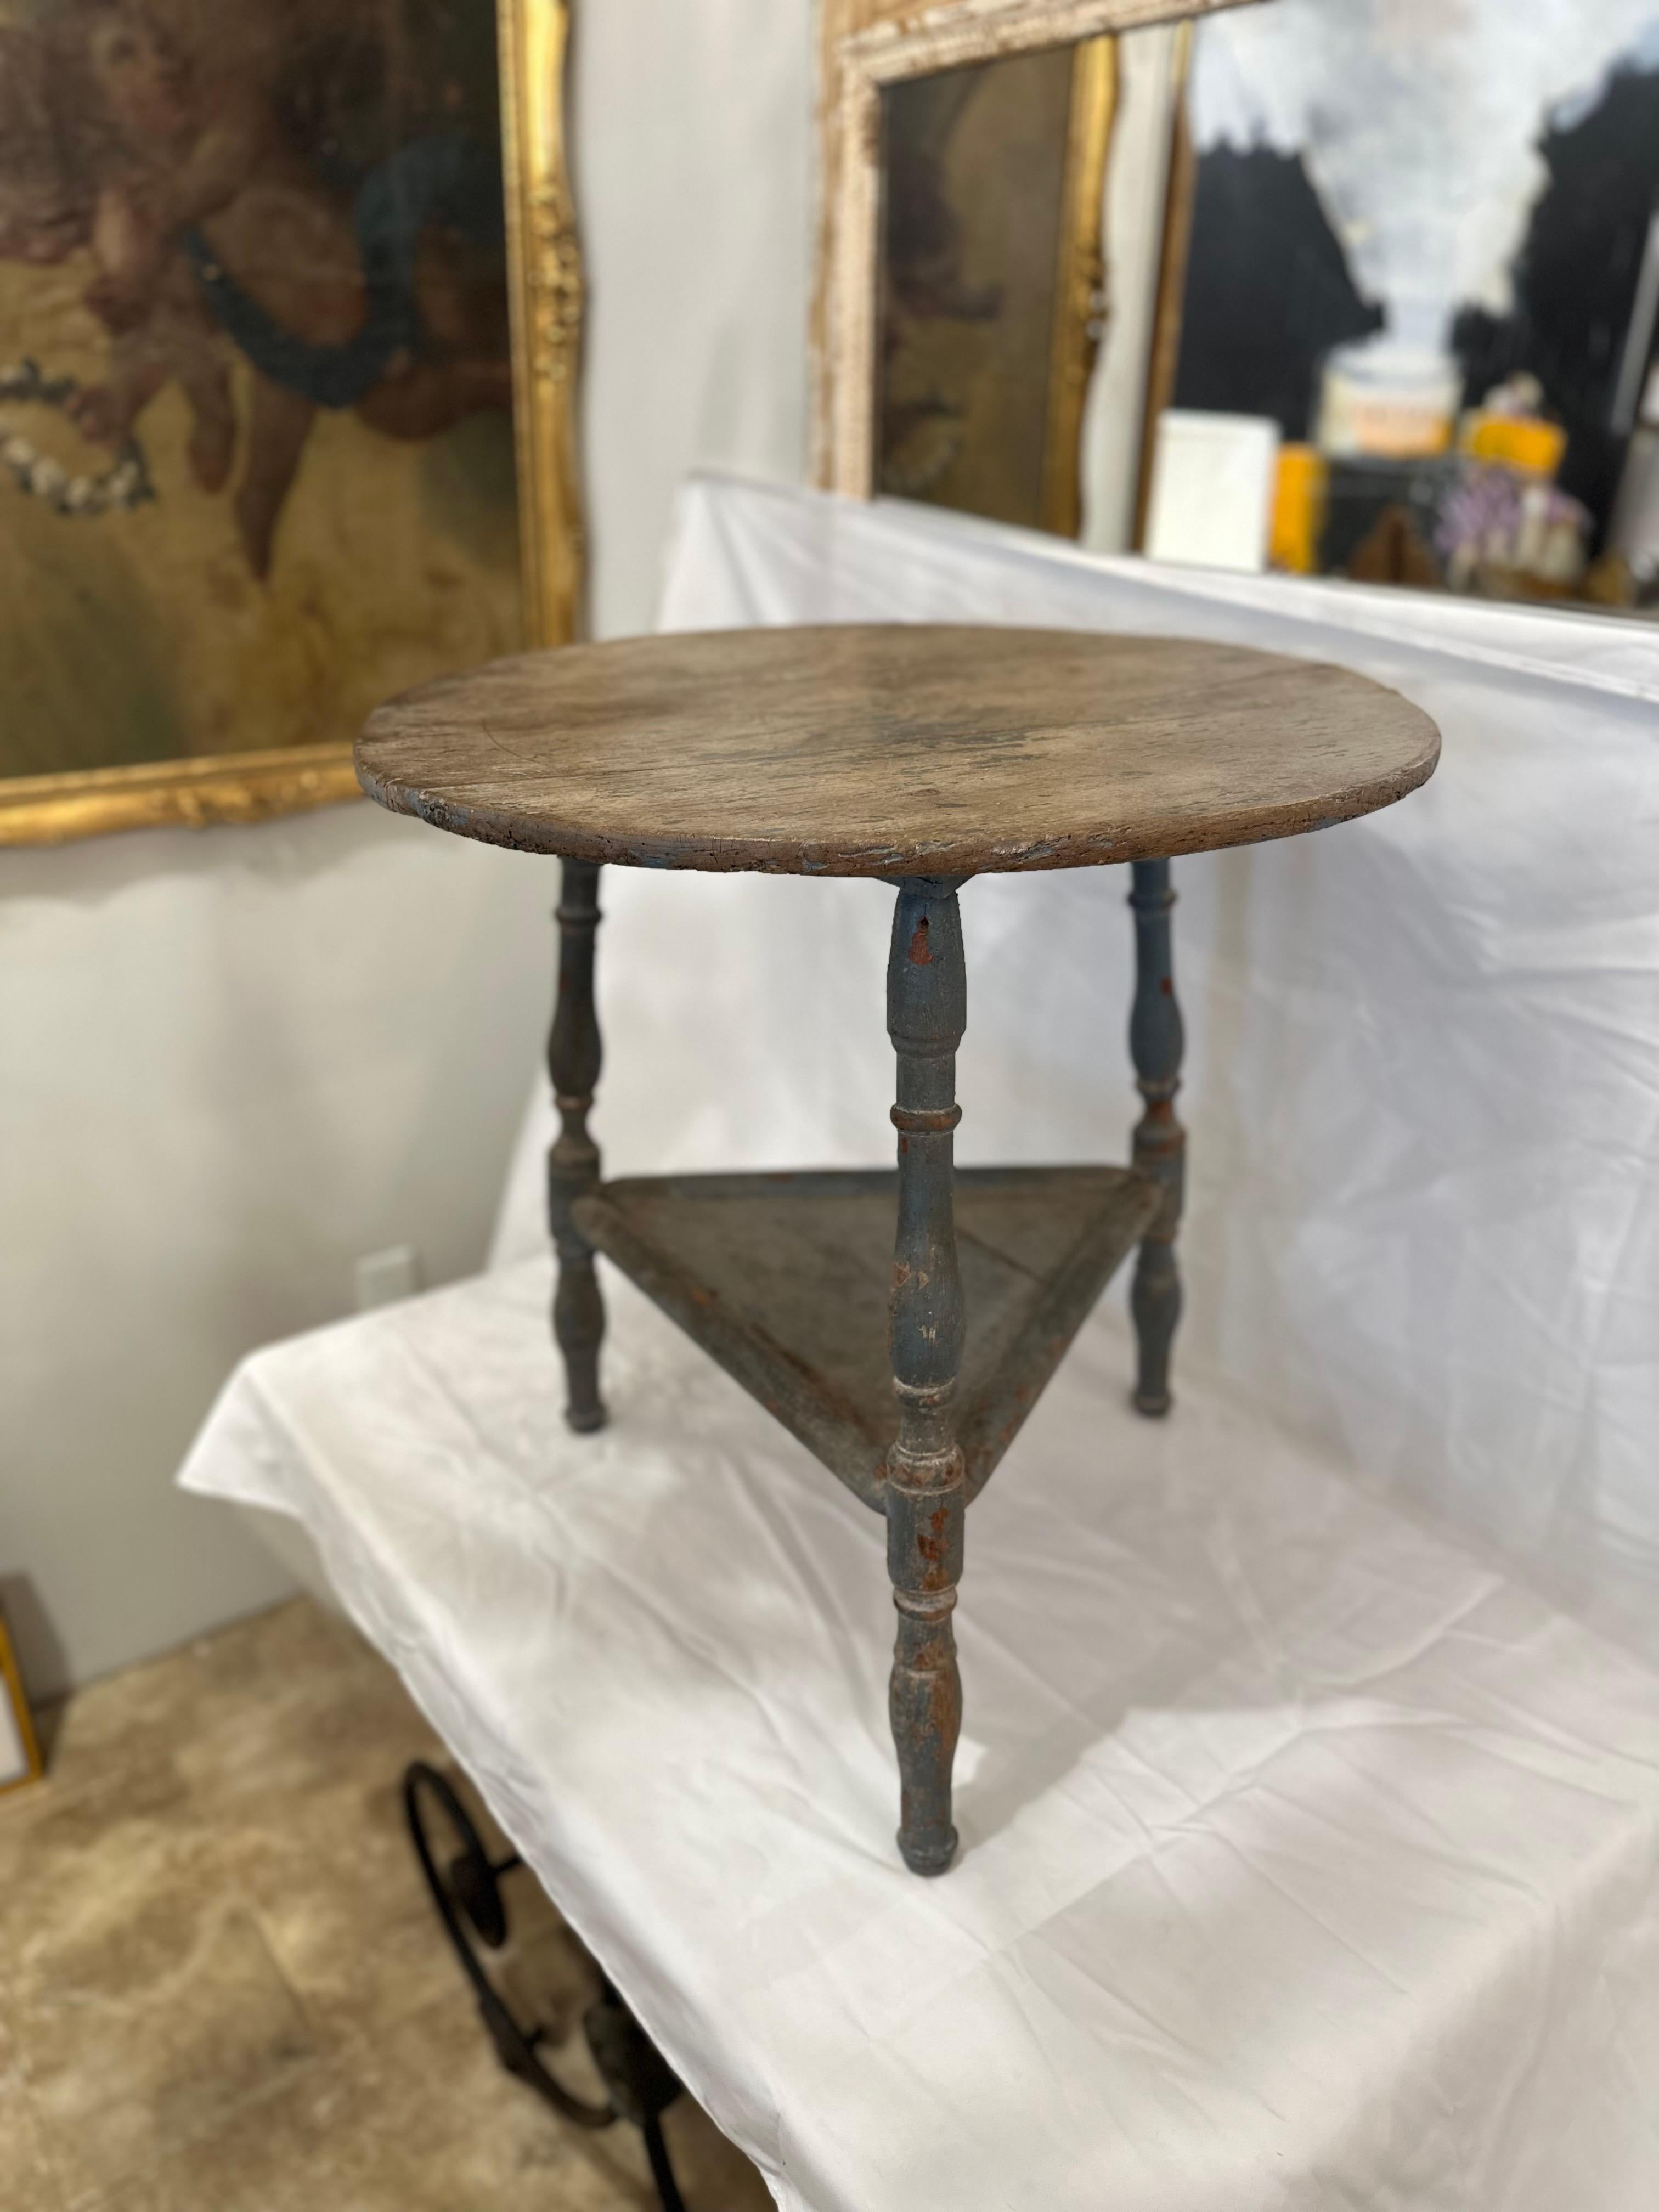 The 19th Century English Original Paint Cricket Table is a charming relic of bygone days, steeped in history and character. Crafted with care and attention to detail, this table features a circular top supported by three gracefully curved legs,